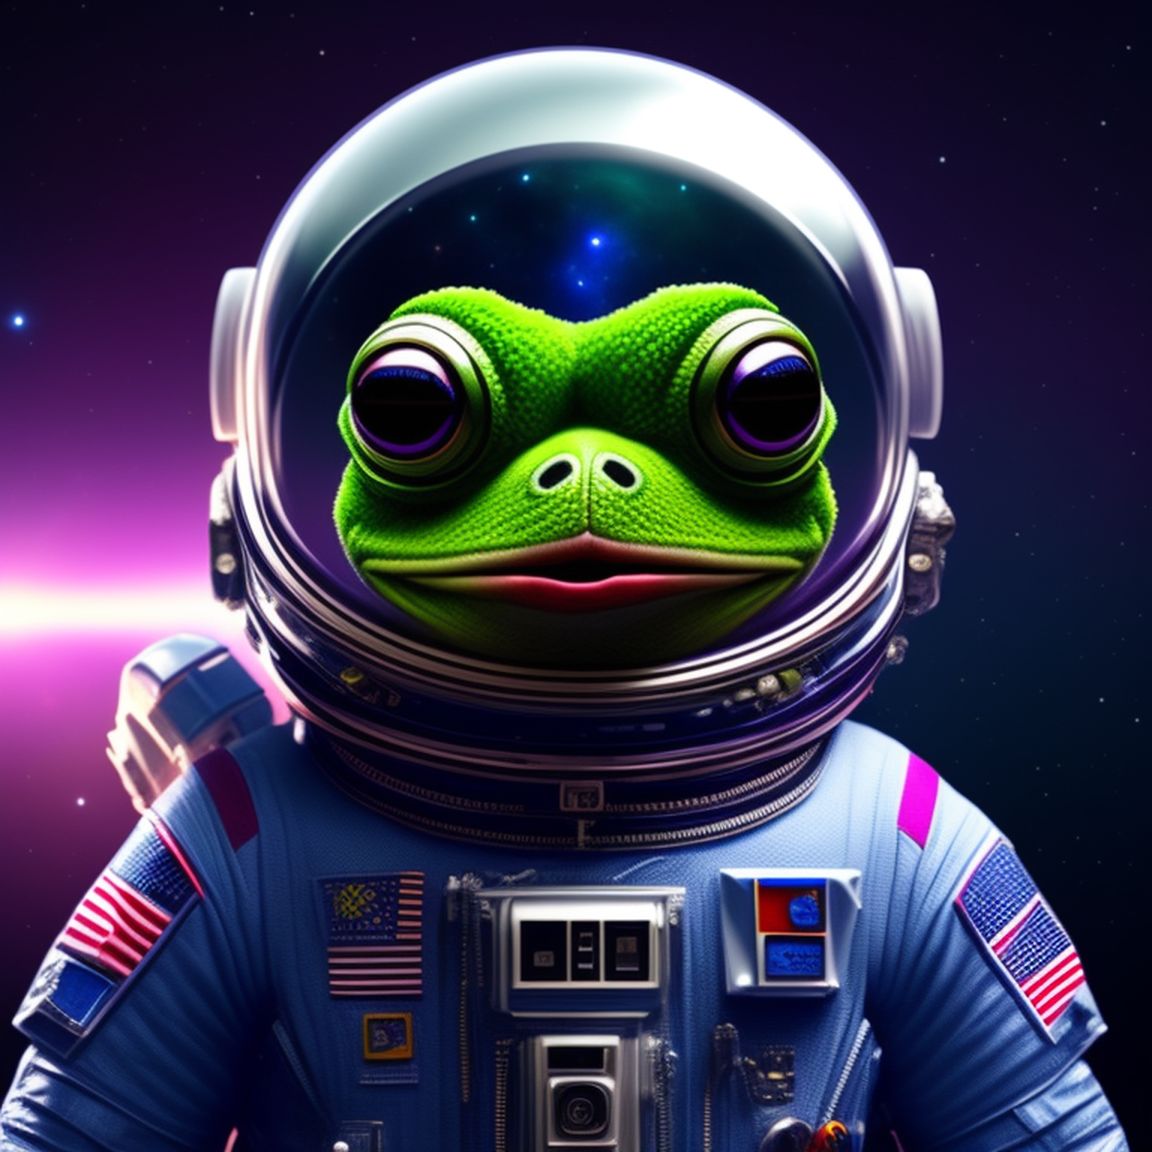 Green pepe Frog with tongue out. Astronaut suit. With frog hands. universe in the background.
Astronaut suit, Detailed, Intricate, scientific, mathematical, Digital art, blue and purple lighting, Futuristic, by artificial intelligence, trending on artstation.